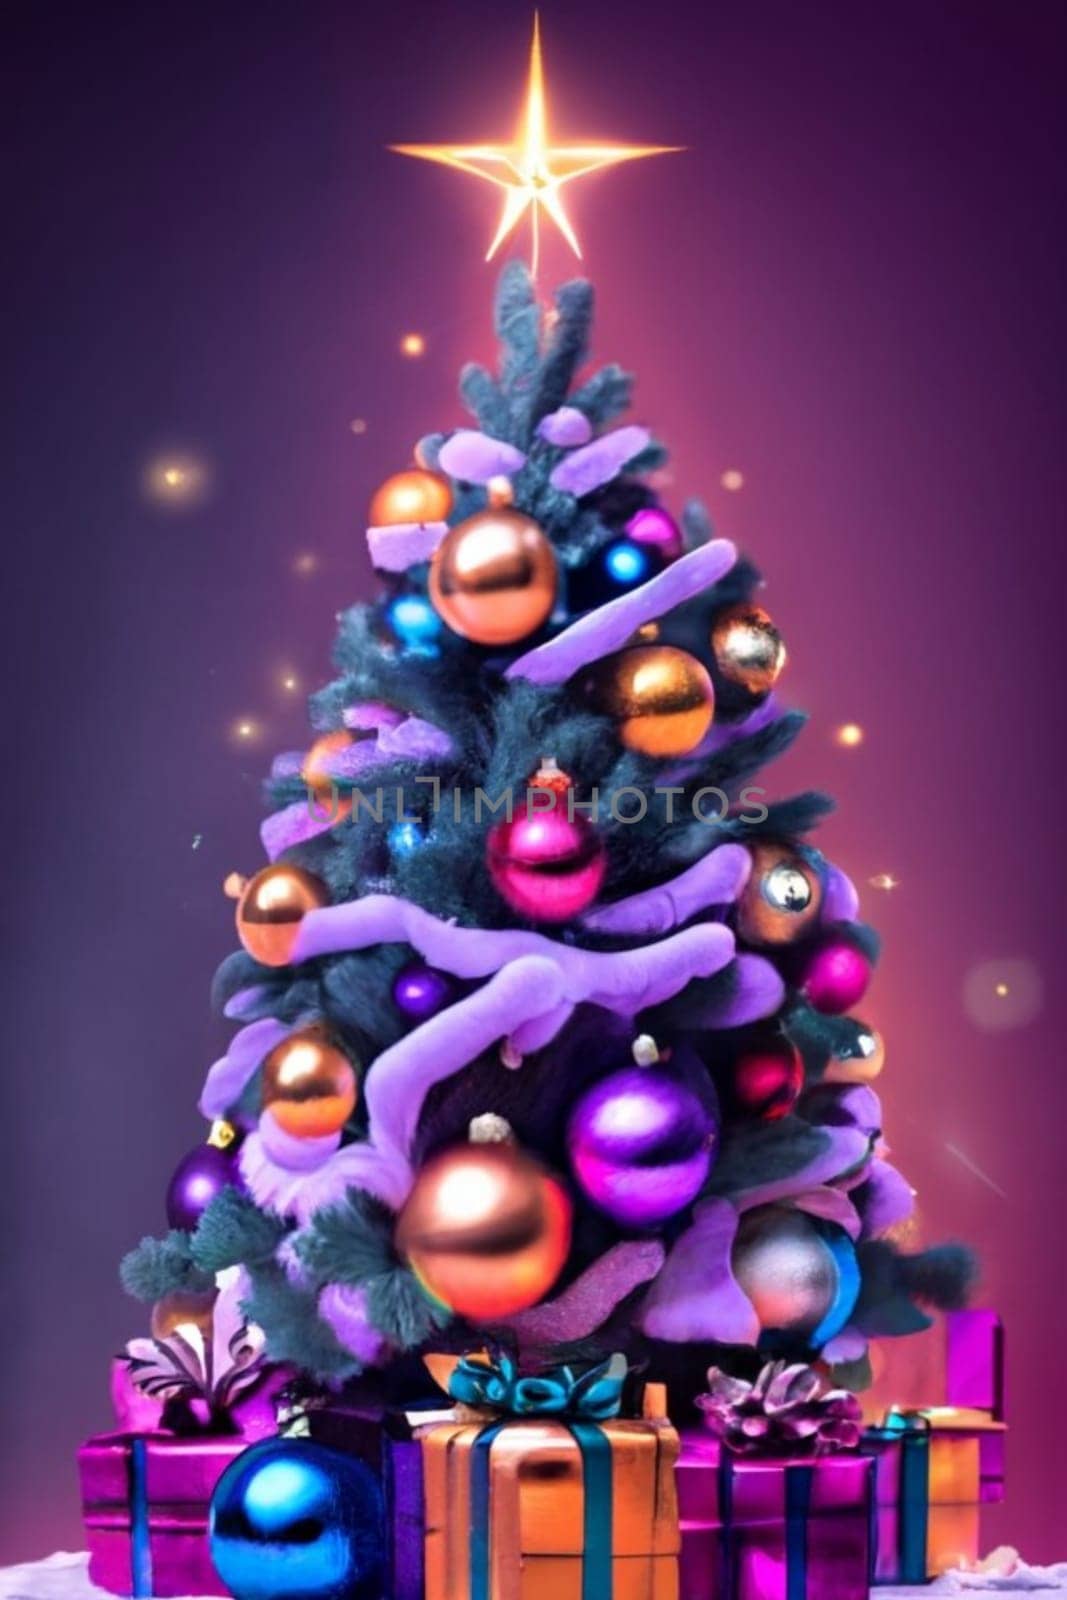 purple christmas tree with ornaments for religious celebration on violet gradient background generartive ai art